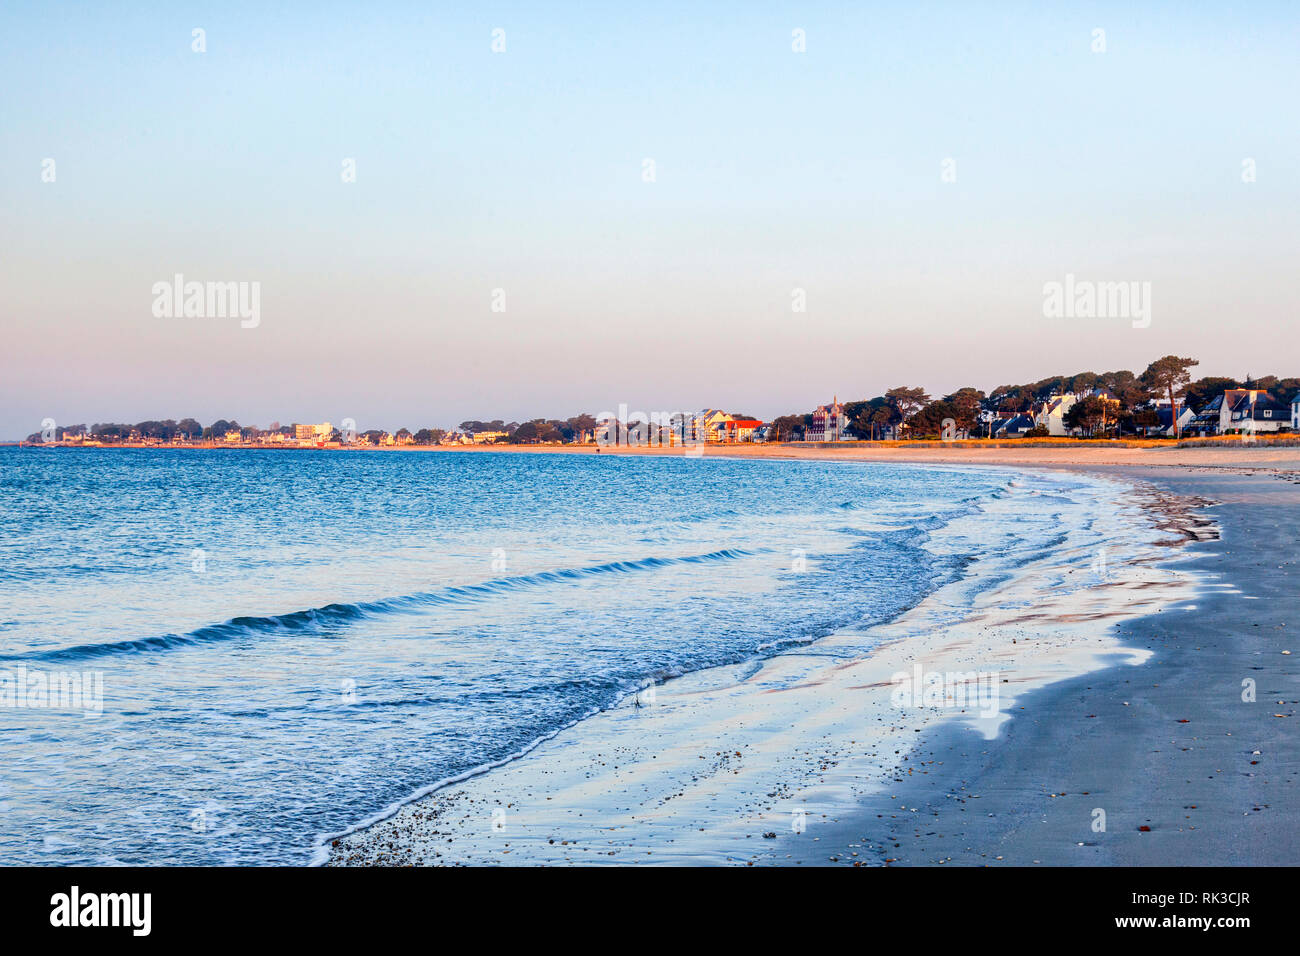 The beach at Carnac, Brittany, France. Stock Photo